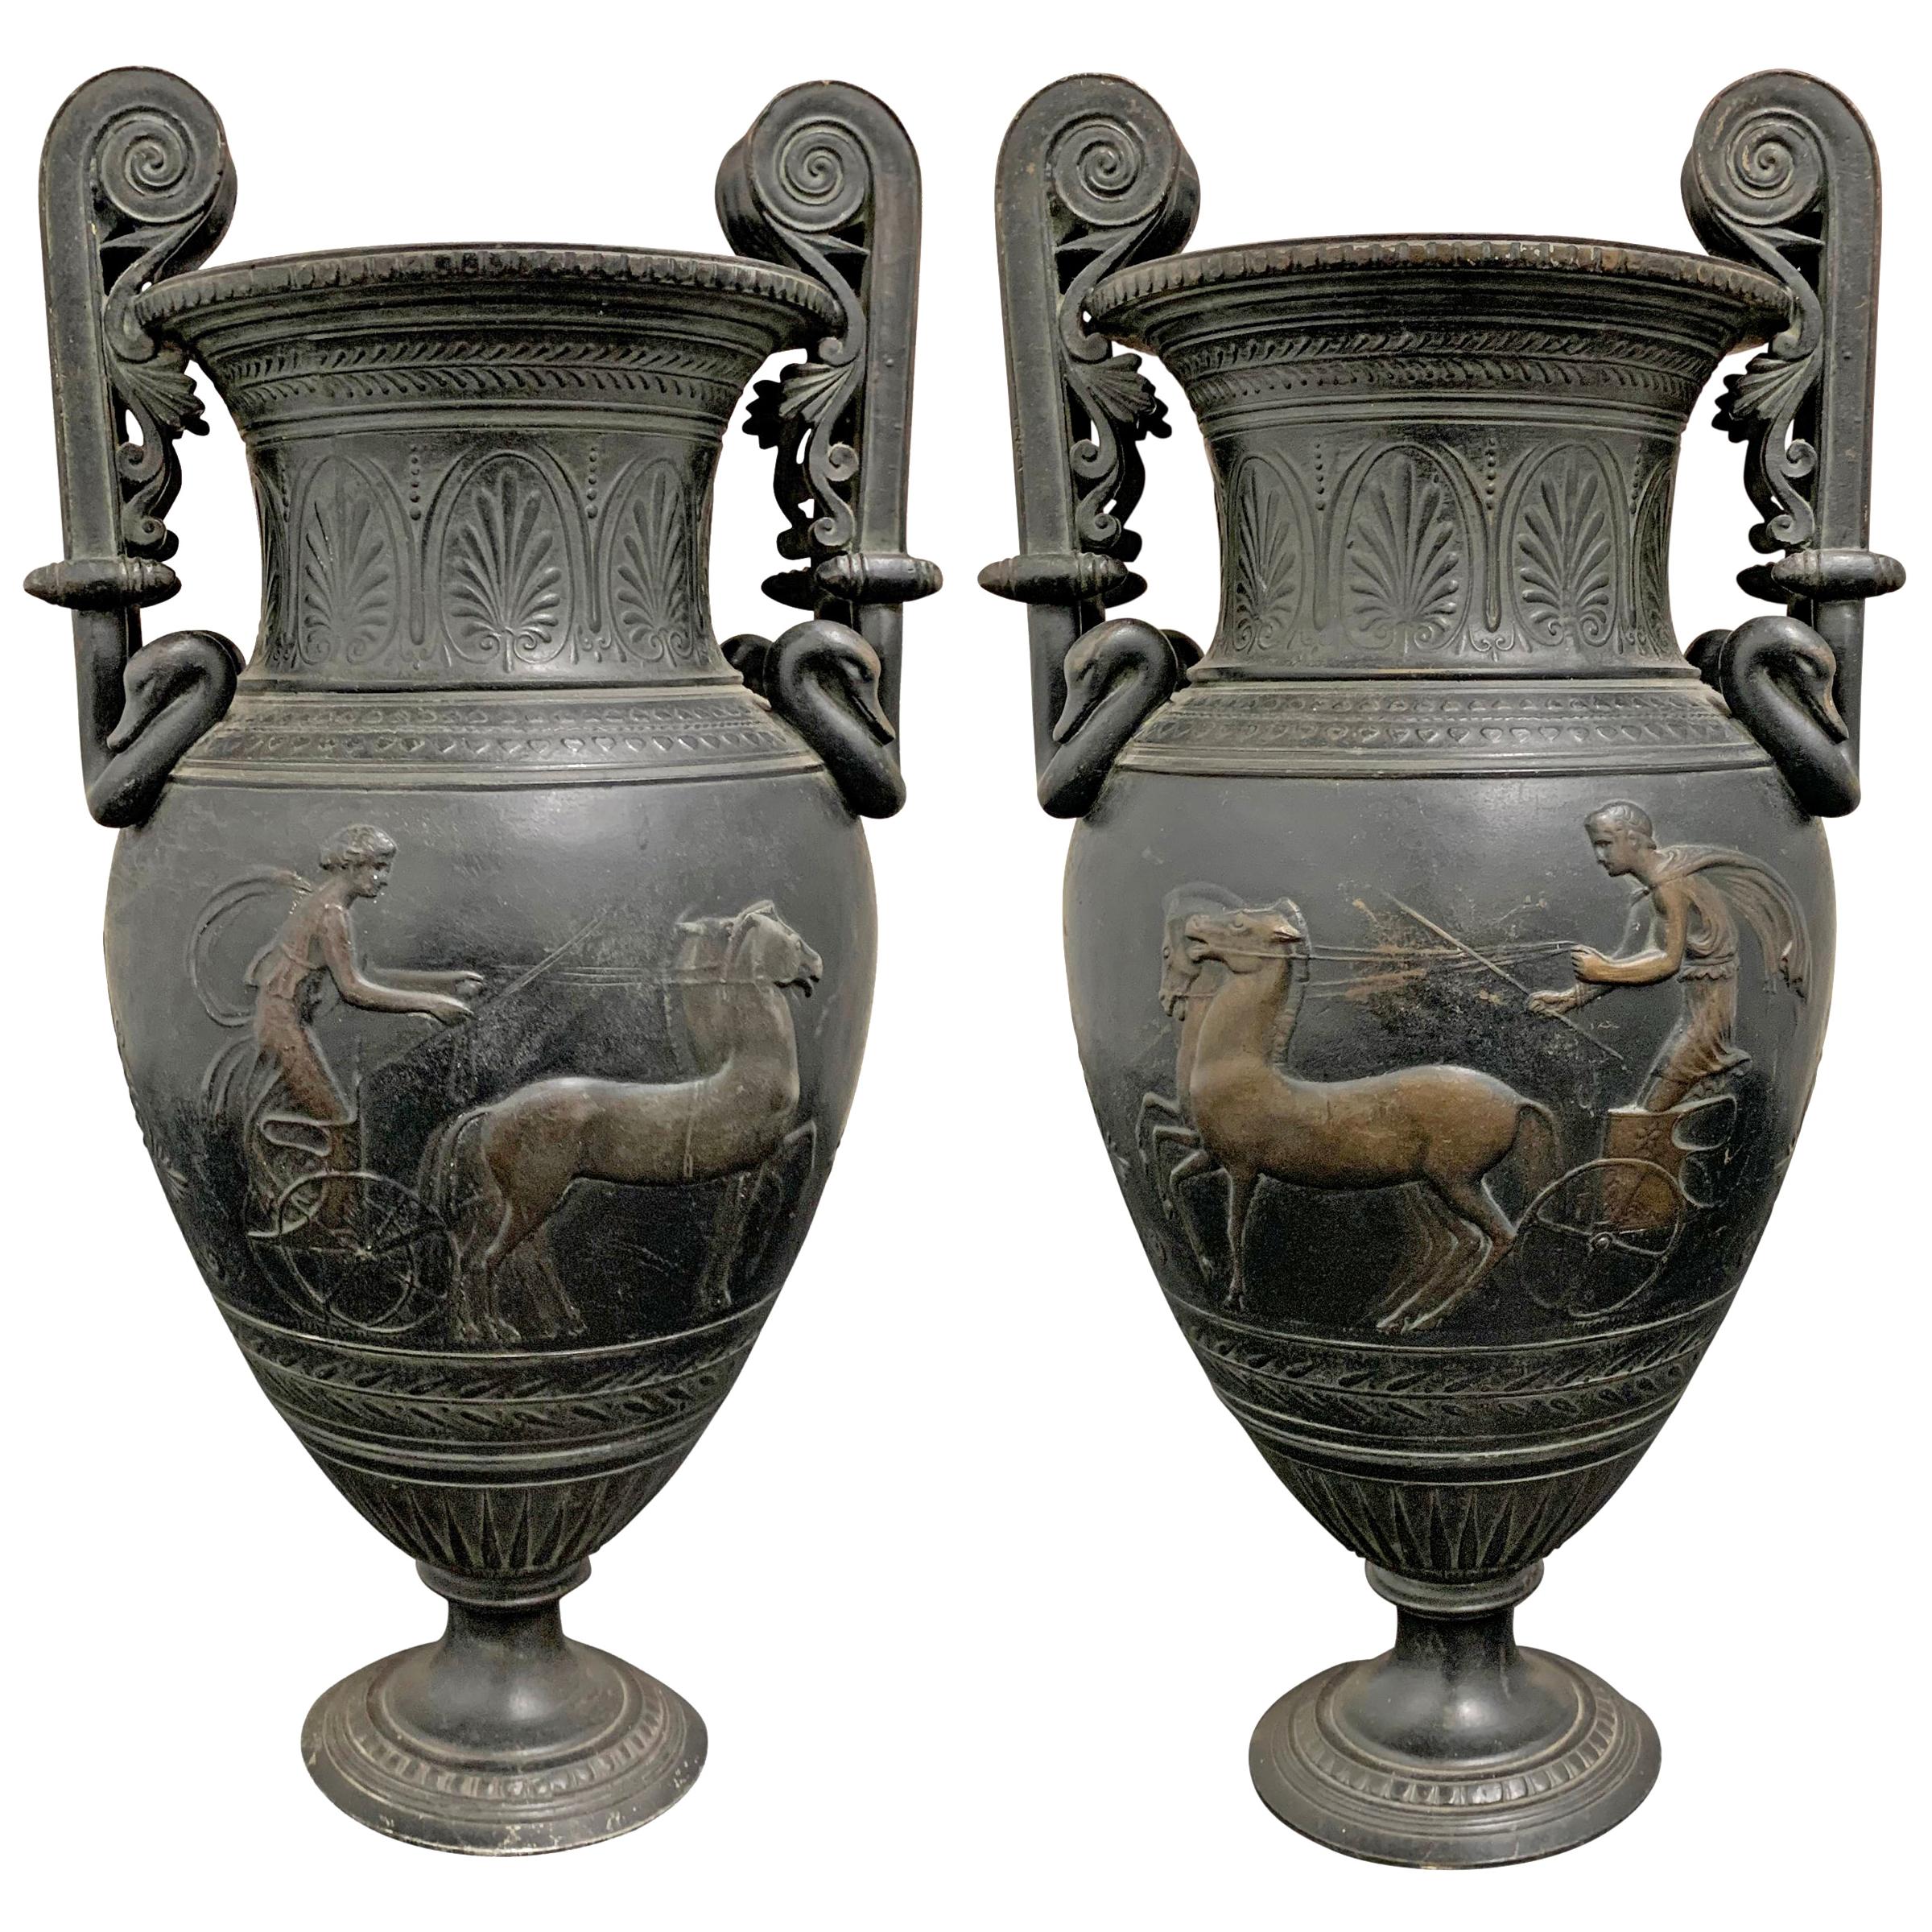 Pair of Early 20th Century Bronze Roman-Style Urns